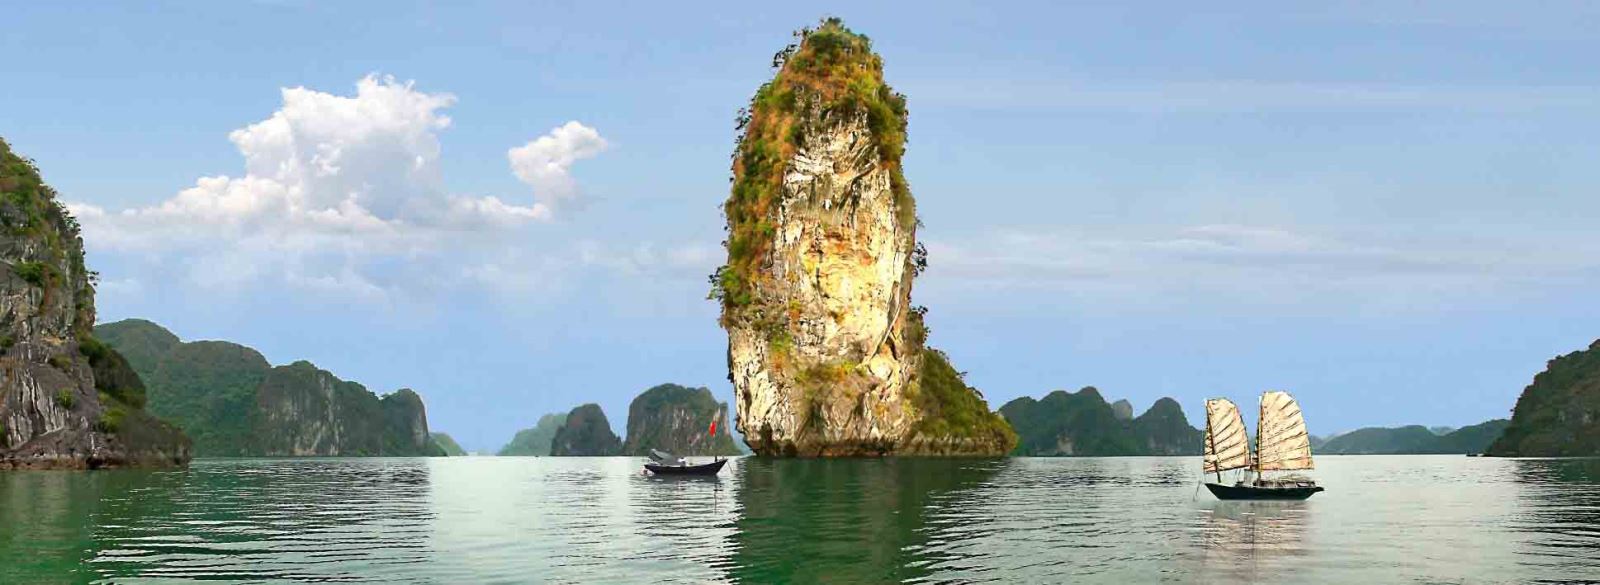 Travel to Halong Bay, the 8th wonder of the world